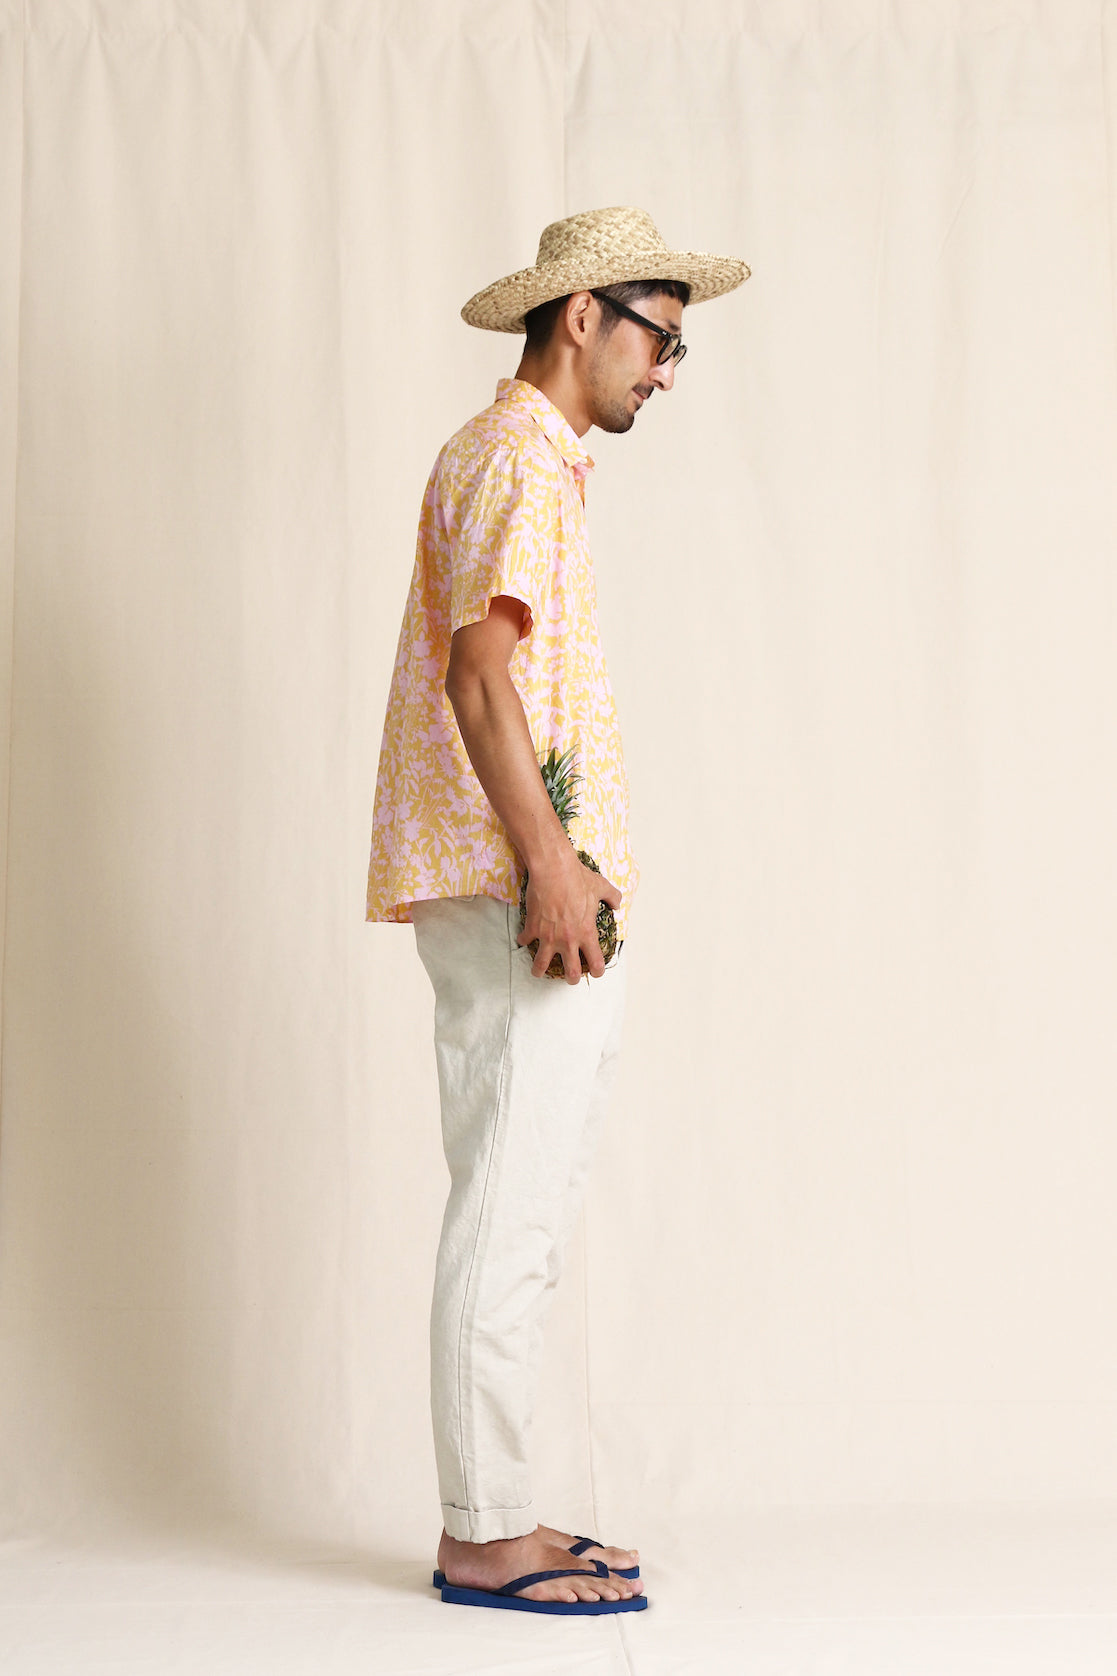 New West Coast button down shirt, Key West (open collar short sleeves), Days (pull on short sleeves)